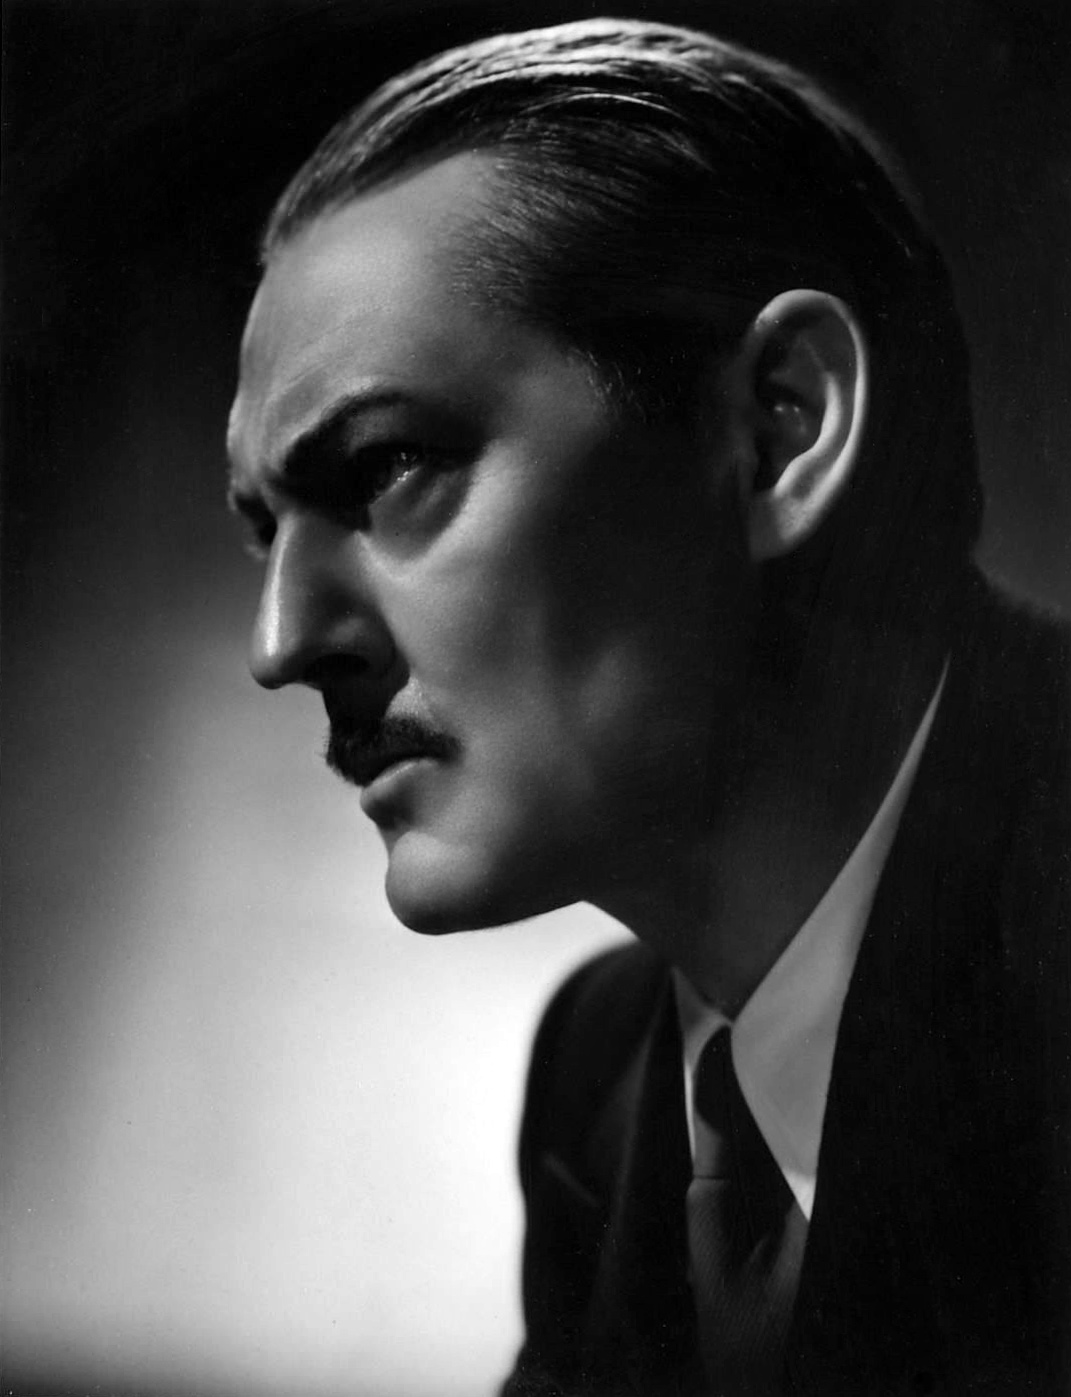 Time Machine to the Twenties: Lionel Barrymore tells it like it is